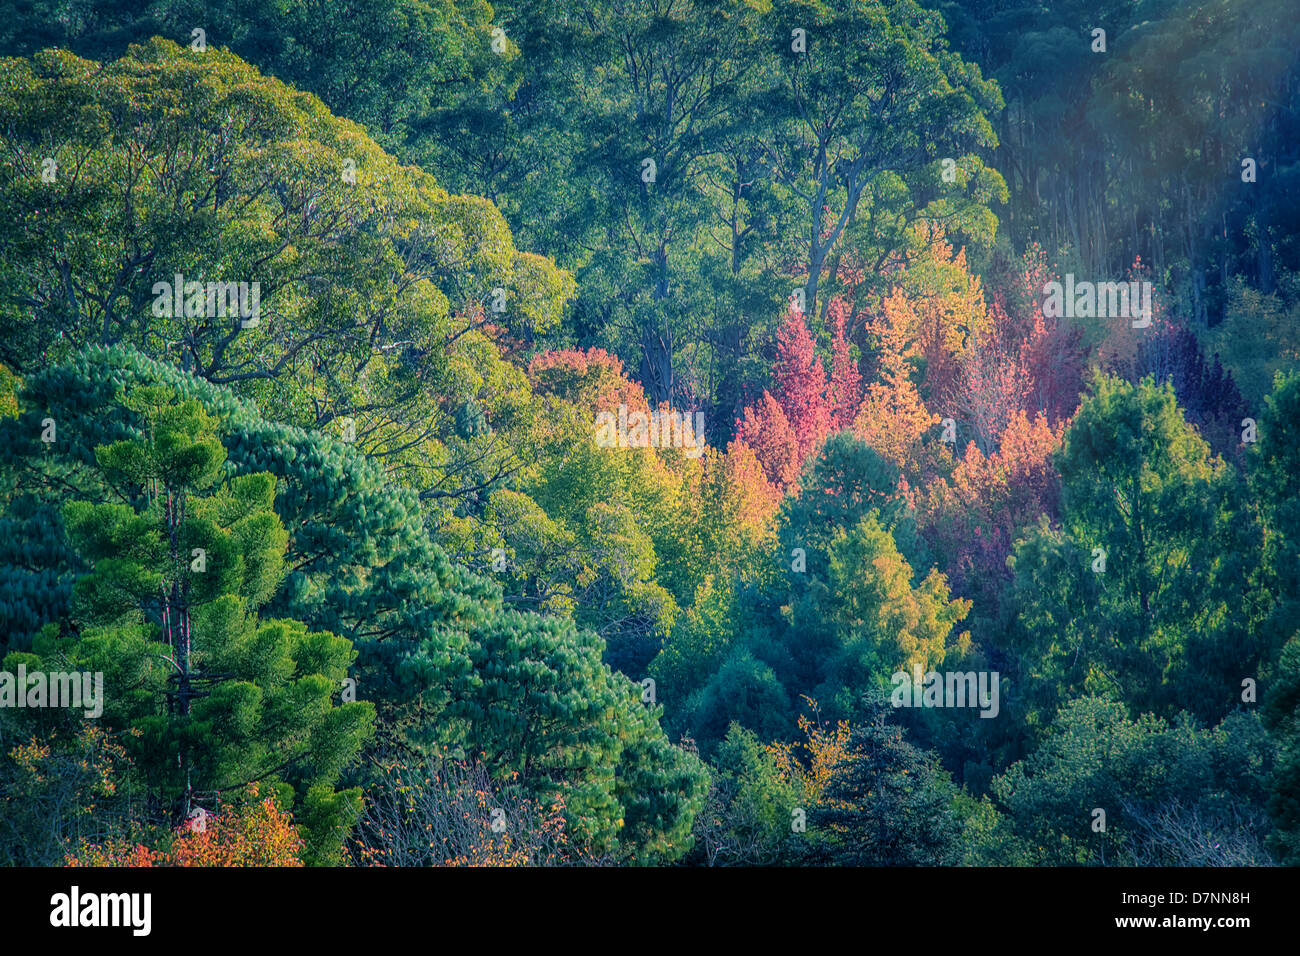 Autumn leaves at Mt Lofty as European trees start changing colour amid the evergreen vegetation. Stock Photo